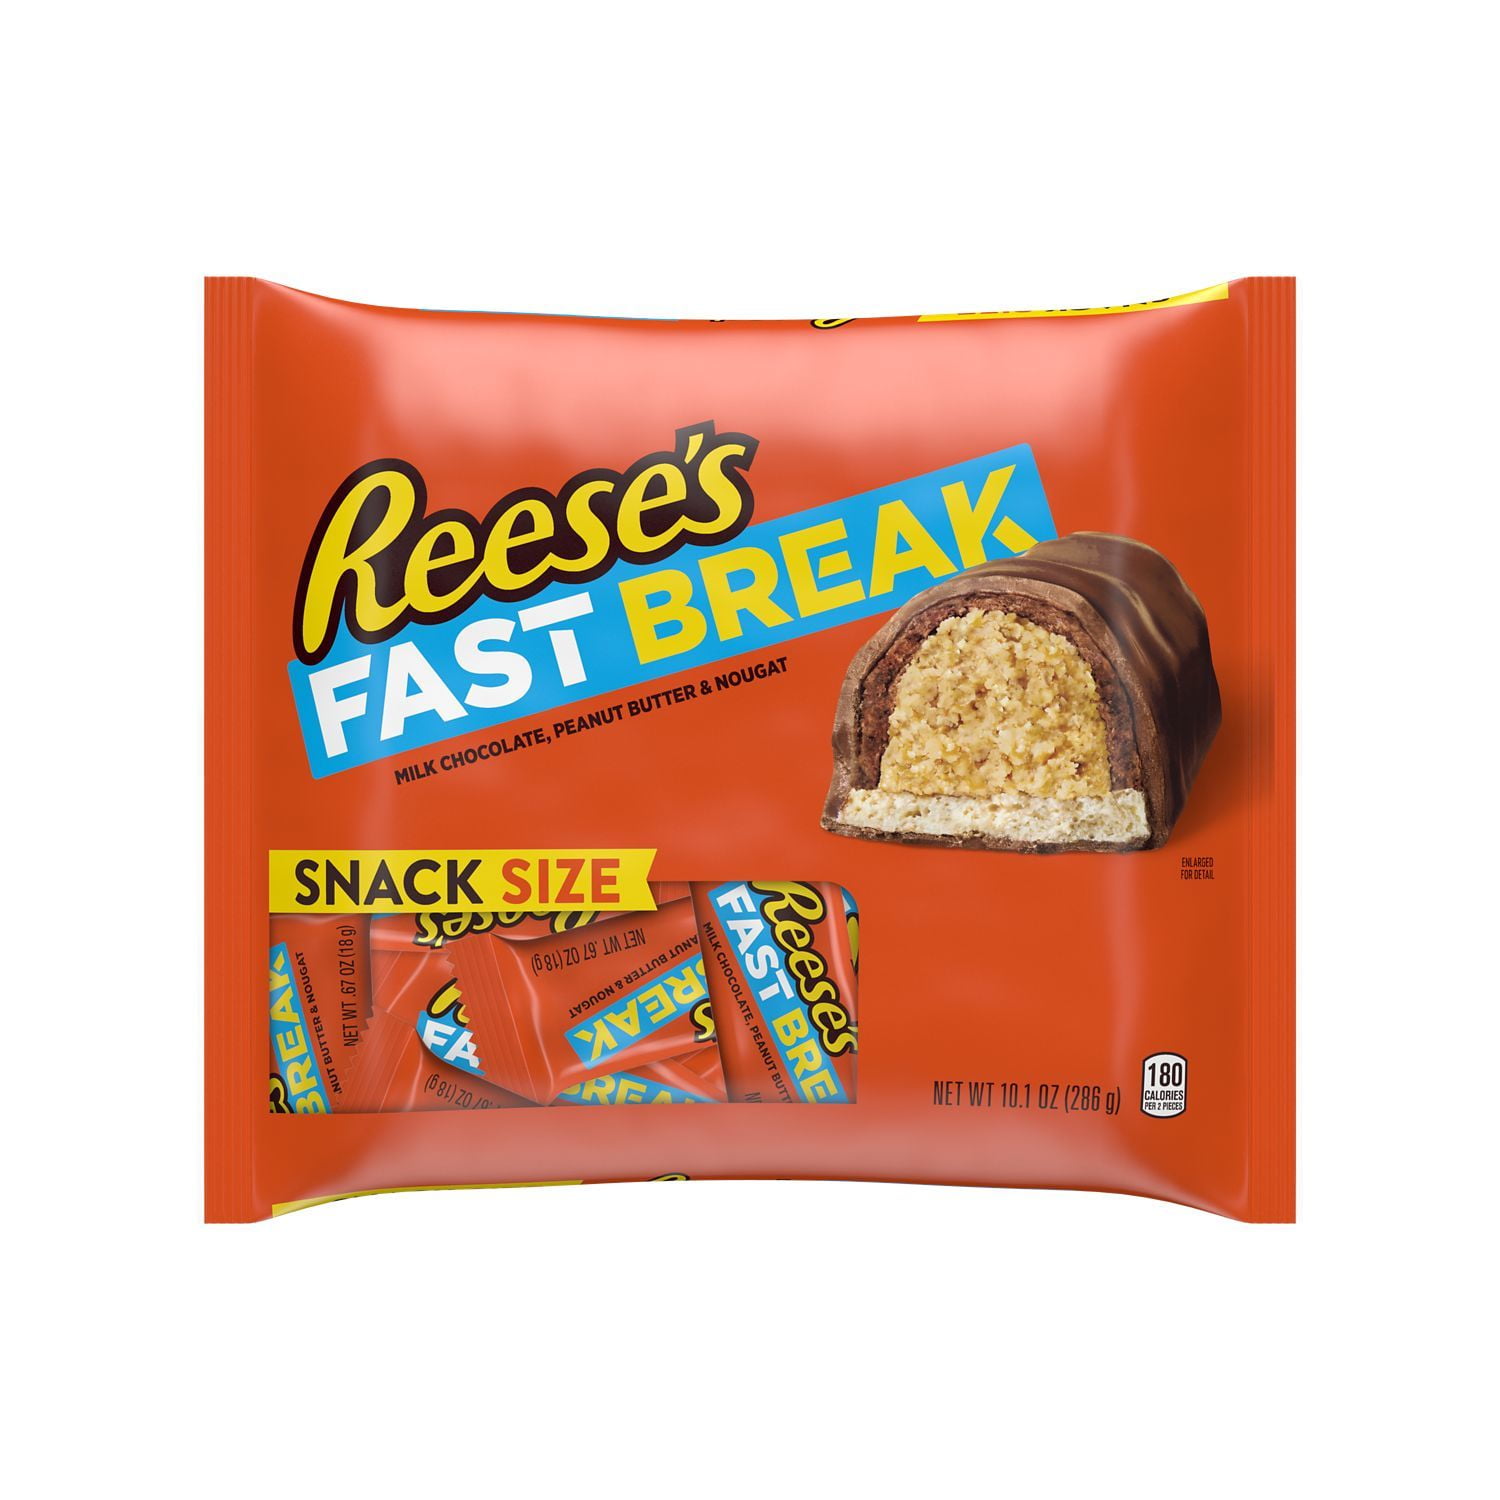 Buy Reese S Fast Break Milk Chocolate Peanut Butter And Nougat Snack Size Candy Bars Gluten